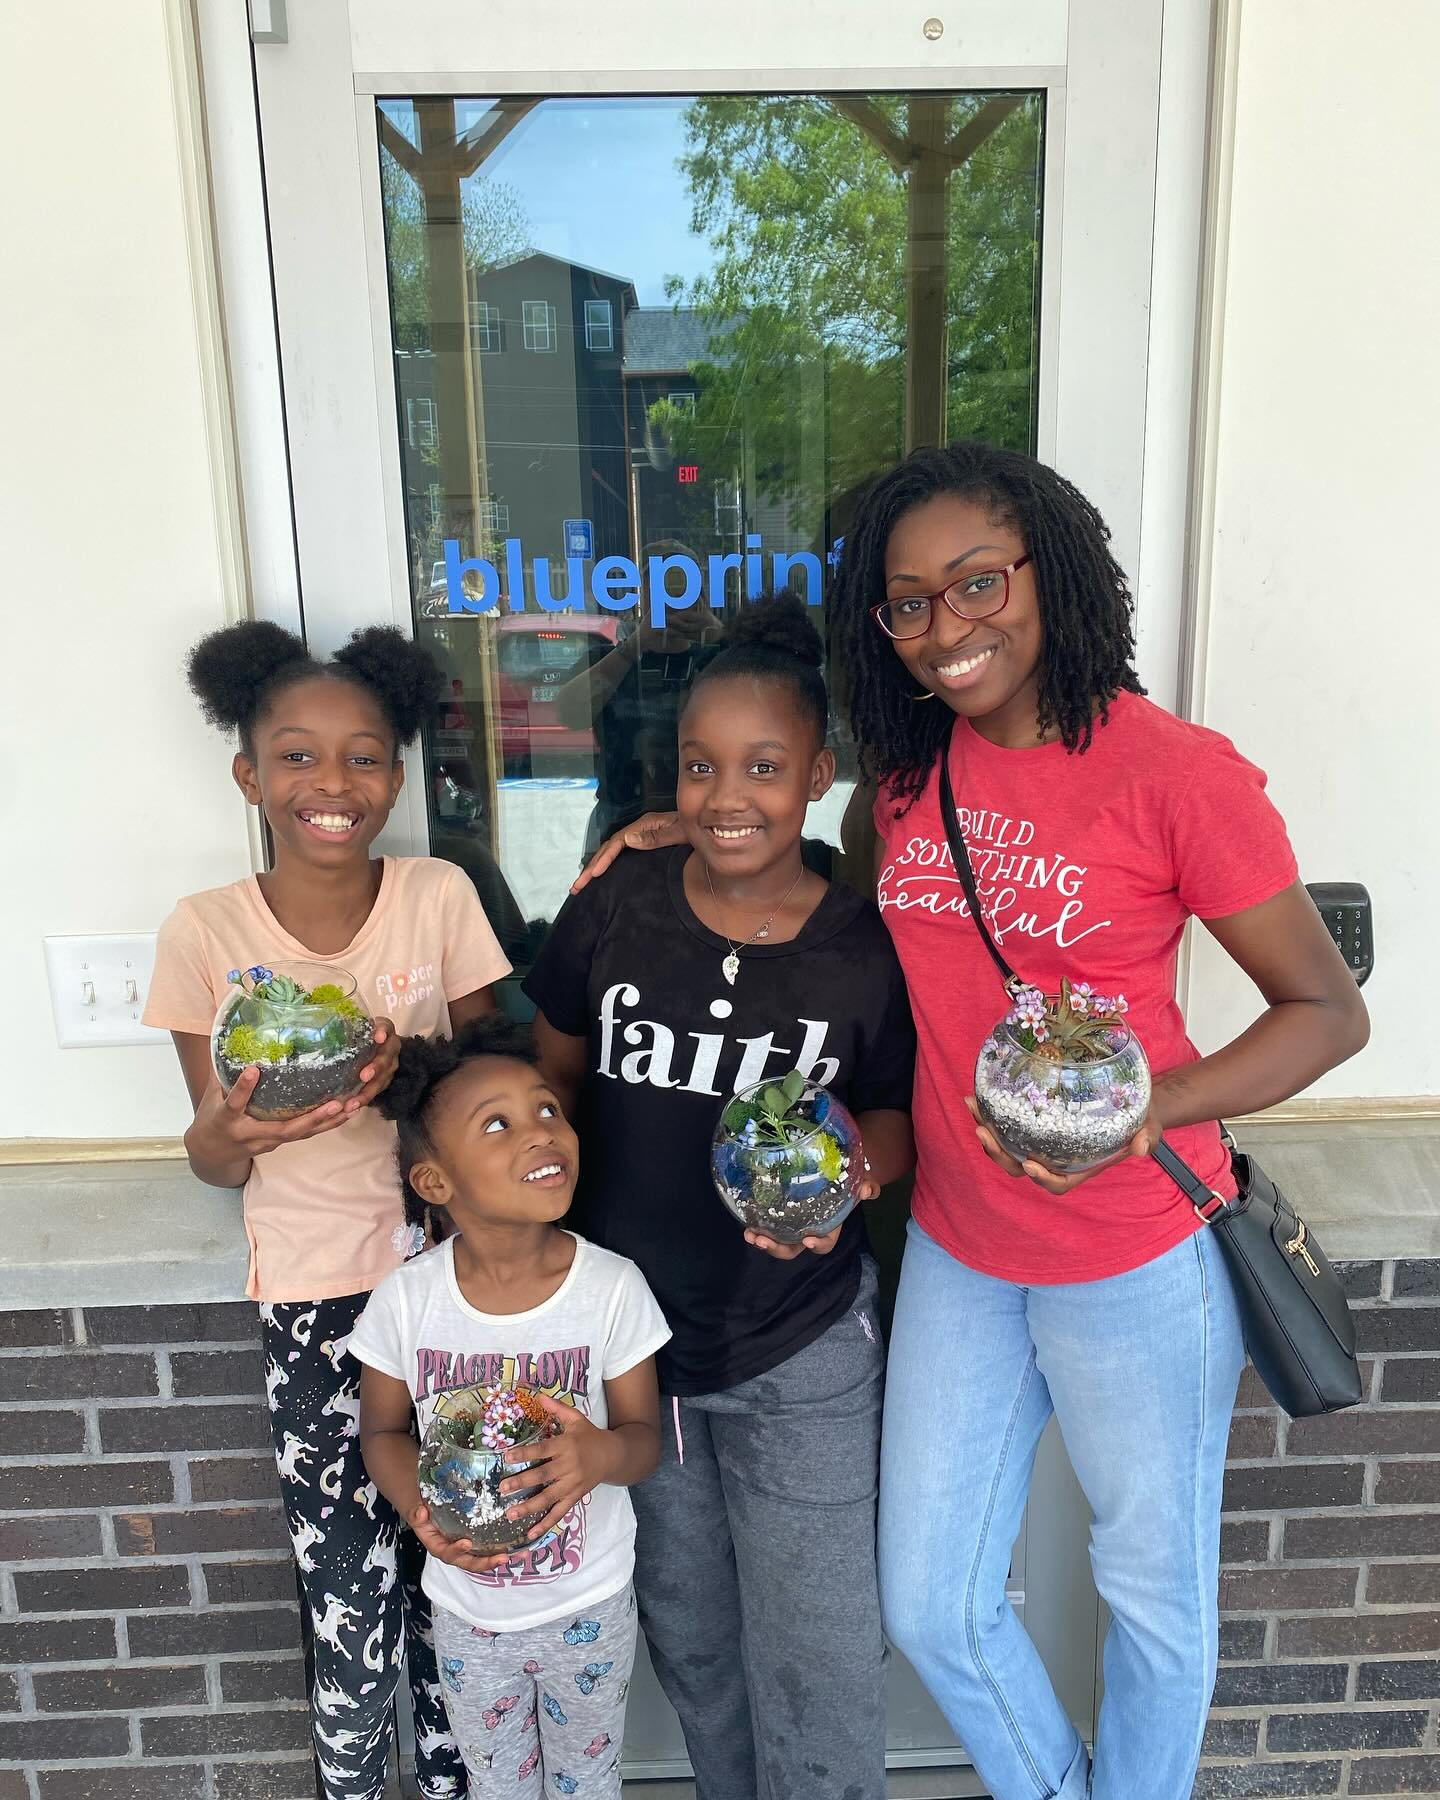 We had so much fun building our own terrariums today! Thank you @planthouseatl for the best Saturday!! #communityevents #terarriumsuculent #atlantamentoring